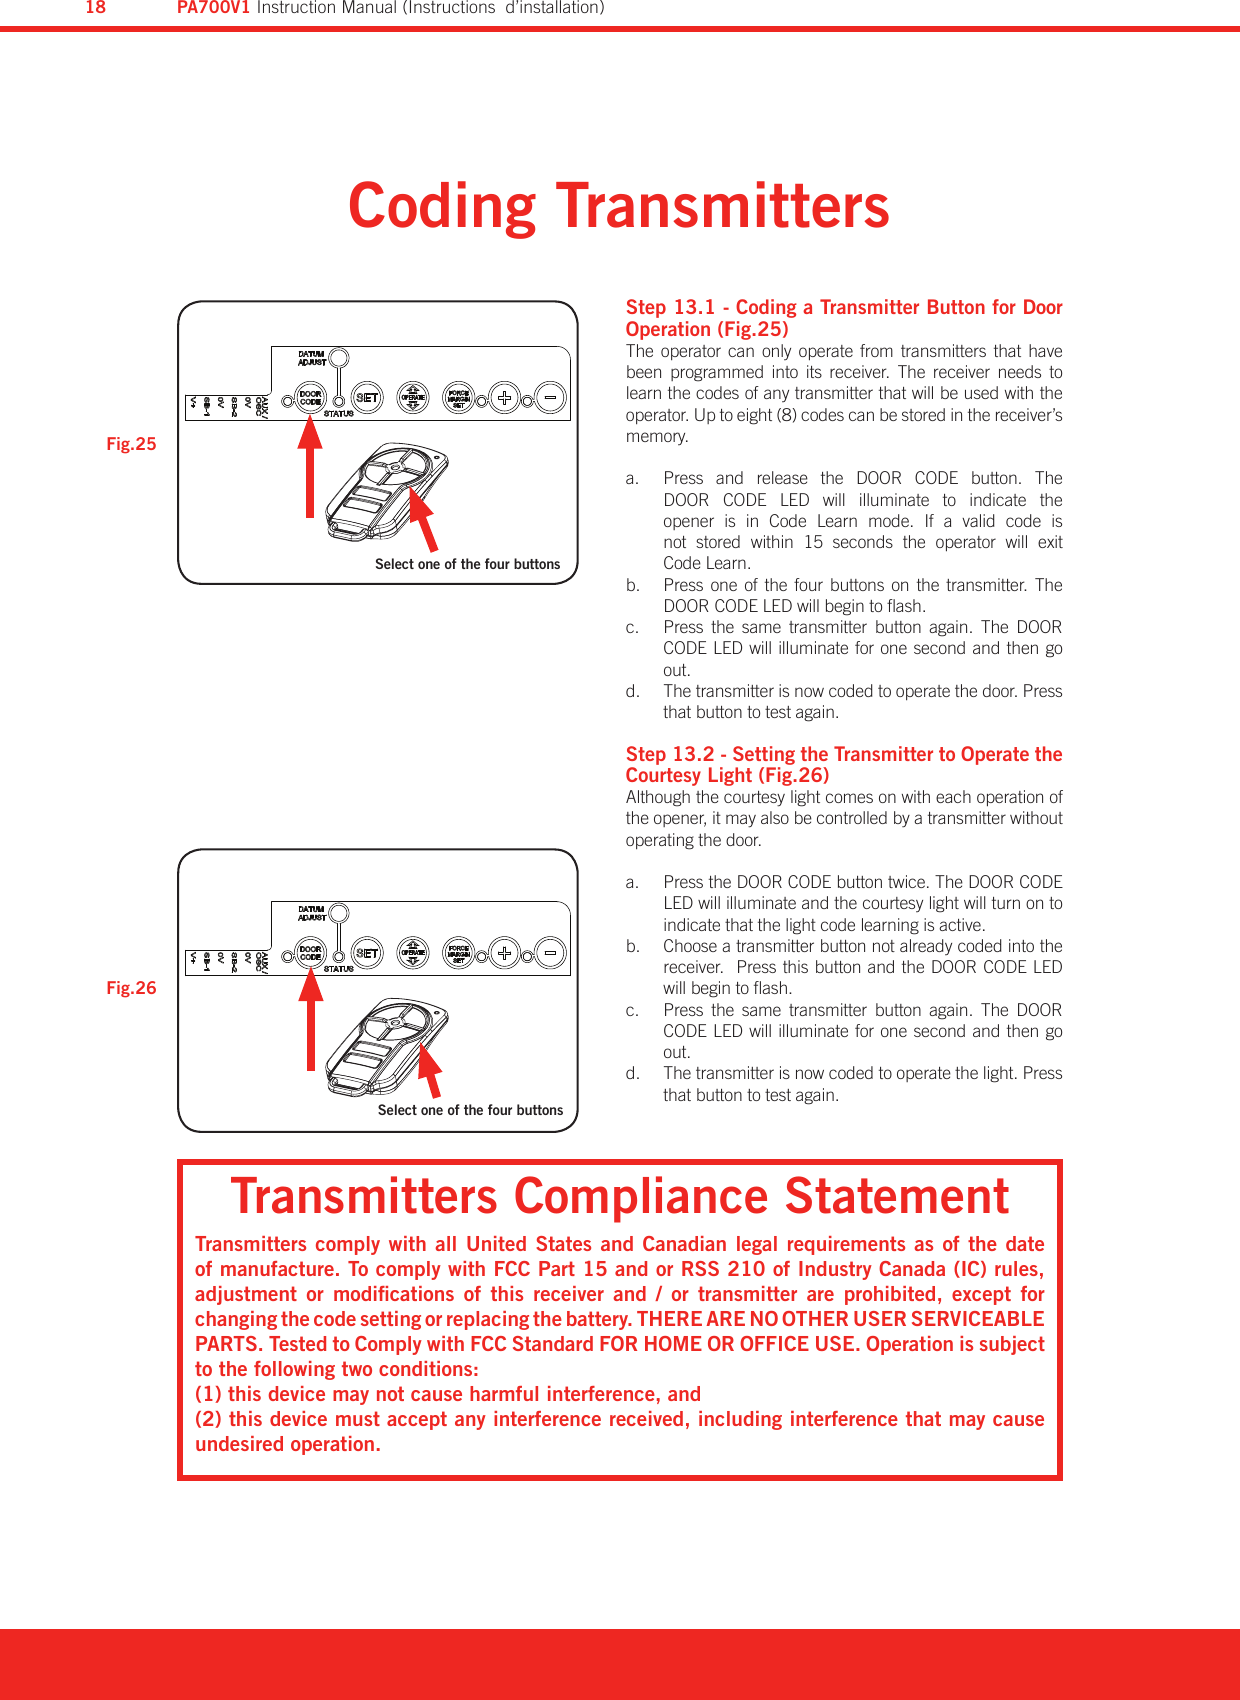 Coding TransmittersFig.25Fig.26Step 13.1 - Coding a Transmitter Button for Door Operation (Fig.25)The  operator  can  only  operate  from  transmitters  that  have been  programmed  into  its  receiver.  The  receiver  needs  to learn the codes of any transmitter that will be used with the operator. Up to eight (8) codes can be stored in the receiver’s memory.Press  and  release  the a.  DOOR  CODE  button.  The DOOR  CODE  LED  will  illuminate  to  indicate  the  opener  is  in  Code  Learn  mode.  If  a  valid  code  is not  stored  within  15  seconds  the  operator  will  exit  Code Learn.Press one of  the  four  buttons  on the  transmitter.  The b. DOOR CODE LED will begin to ash.Press  the  same  transmitter  button  again.  The  DOOR c. CODE LED will illuminate for one second and then go out.The transmitter is now coded to operate the door. Press d. that button to test again.Step 13.2 - Setting the Transmitter to Operate the Courtesy Light (Fig.26)Although the courtesy light comes on with each operation of the opener, it may also be controlled by a transmitter without operating the door.Press the a.  DOOR CODE button twice. The DOOR CODE LED will illuminate and the courtesy light will turn on to indicate that the light code learning is active.Choose a transmitter button not already coded into the b. receiver.  Press this button and the DOOR CODE LED will begin to ash.Press  the  same  transmitter  button  again.  The  DOOR c. CODE LED will illuminate for one second and then go out.The transmitter is now coded to operate the light. Press d. that button to test again.Transmitters Compliance StatementTransmitters  comply  with all United  States and Canadian legal  requirements as of  the date of manufacture. To comply with FCC Part 15 and or RSS 210 of Industry Canada (IC) rules, adjustment  or  modications  of  this  receiver  and  /  or  transmitter  are  prohibited,  except  for changing the code setting or replacing the battery. THERE ARE NO OTHER USER SERVICEABLE PARTS. Tested to Comply with FCC Standard FOR HOME OR OFFICE USE. Operation is subject to the following two conditions:(1) this device may not cause harmful interference, and(2) this device must accept any interference received, including interference that may cause undesired operation.Select one of the four buttonsSelect one of the four buttonsPA700V1 Instruction Manual (Instructions  d’installation)18